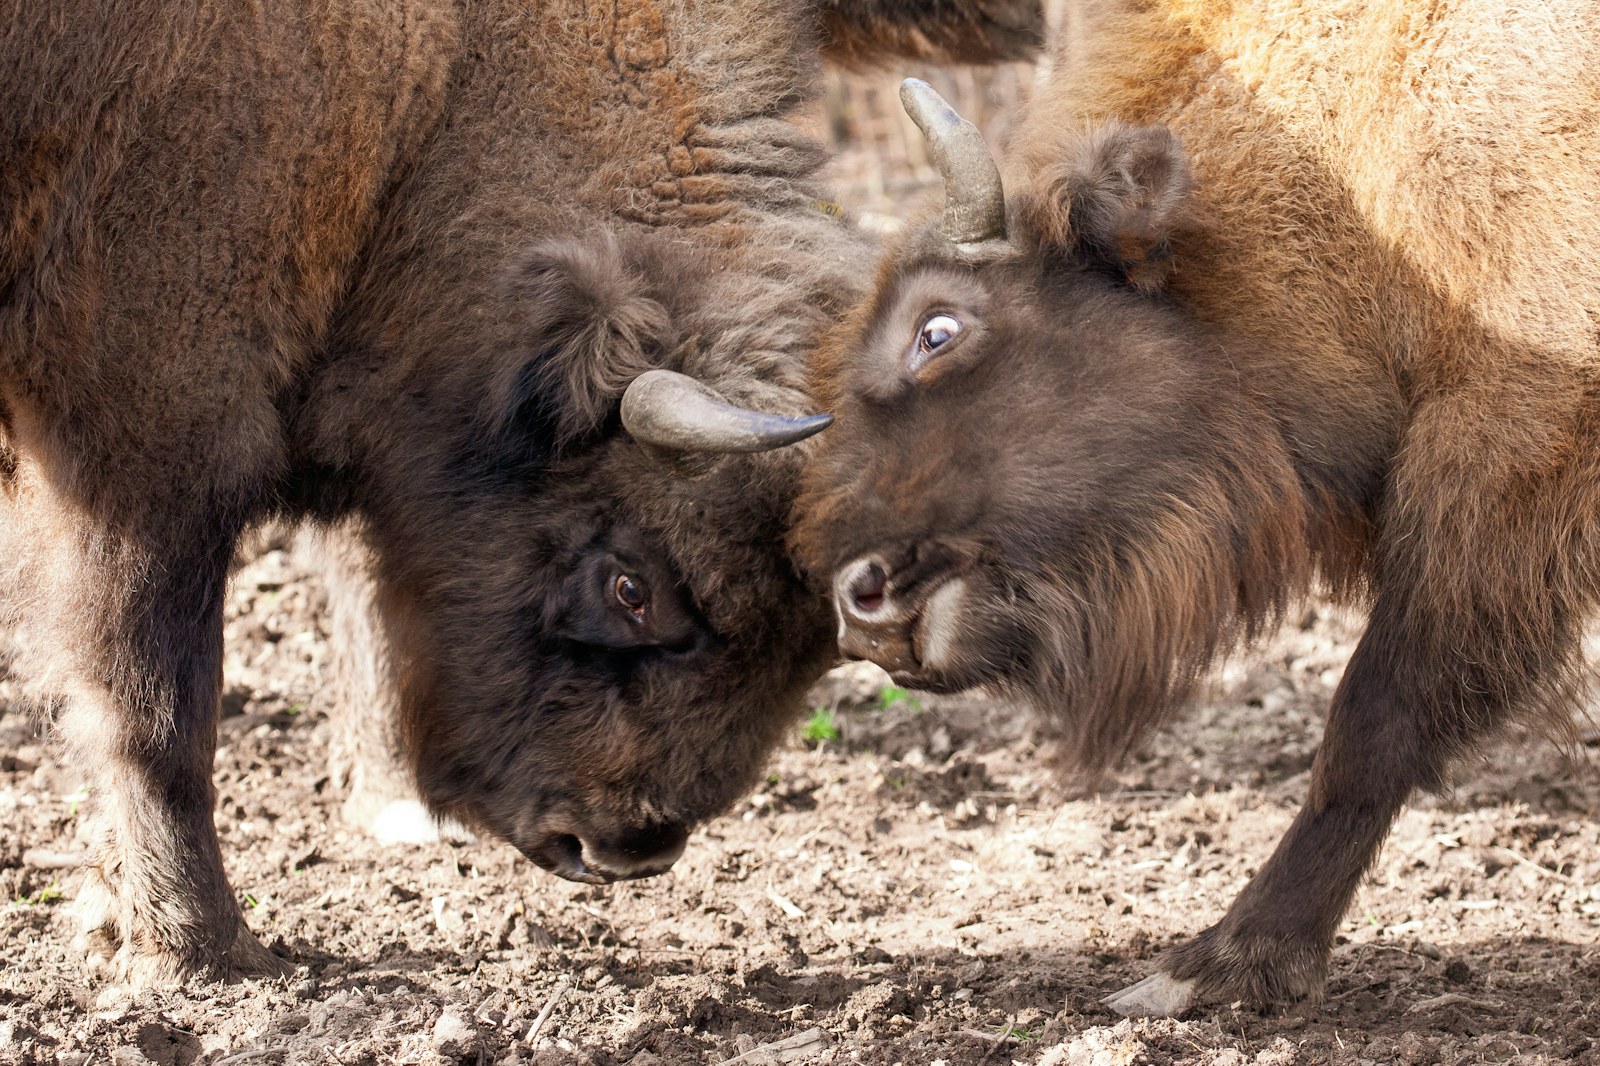 A close up shot of bison bull and female locking horns